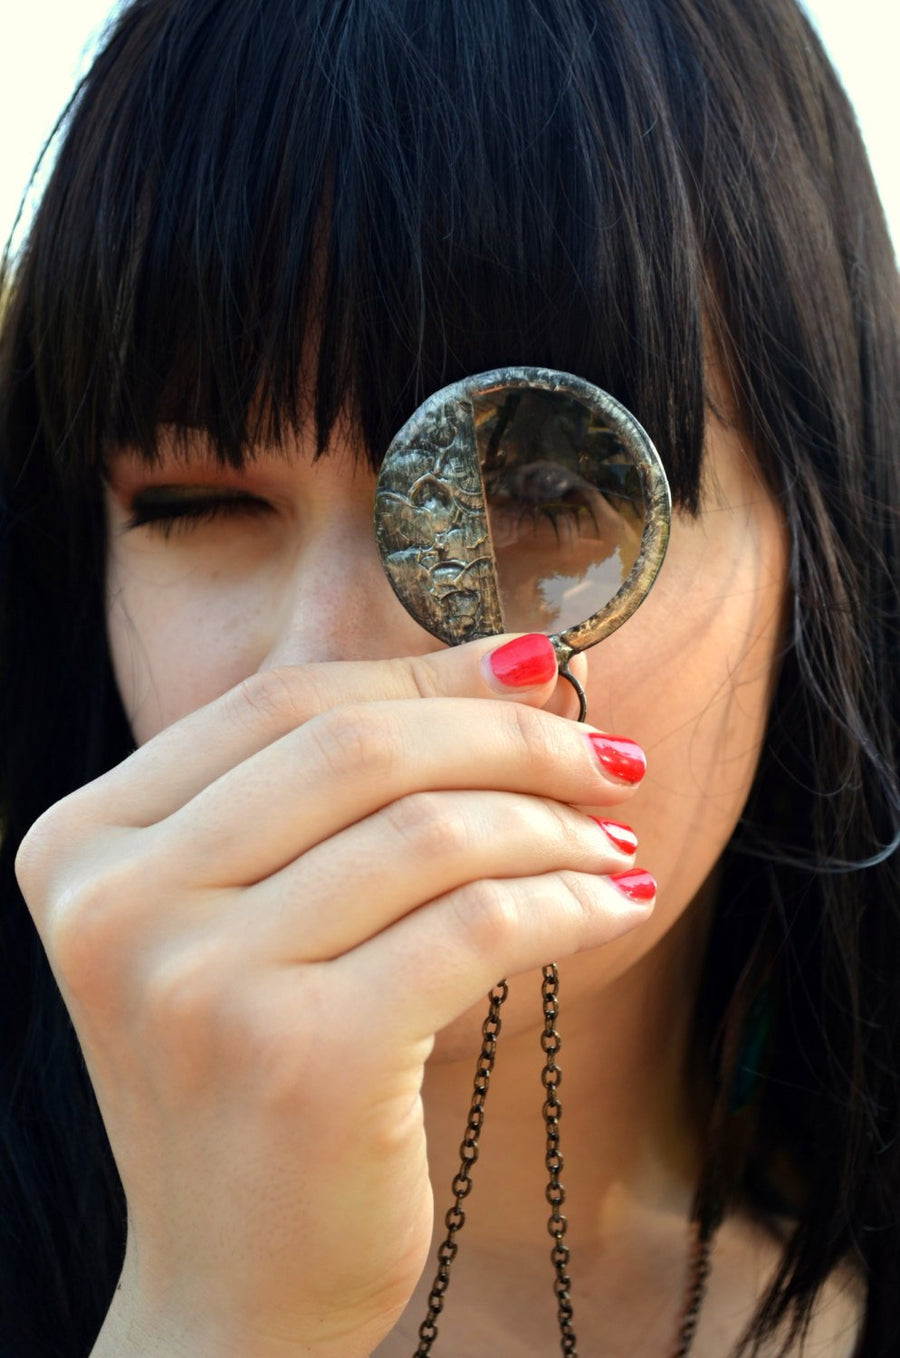 Model_looking_through_Steampunk_magnifier